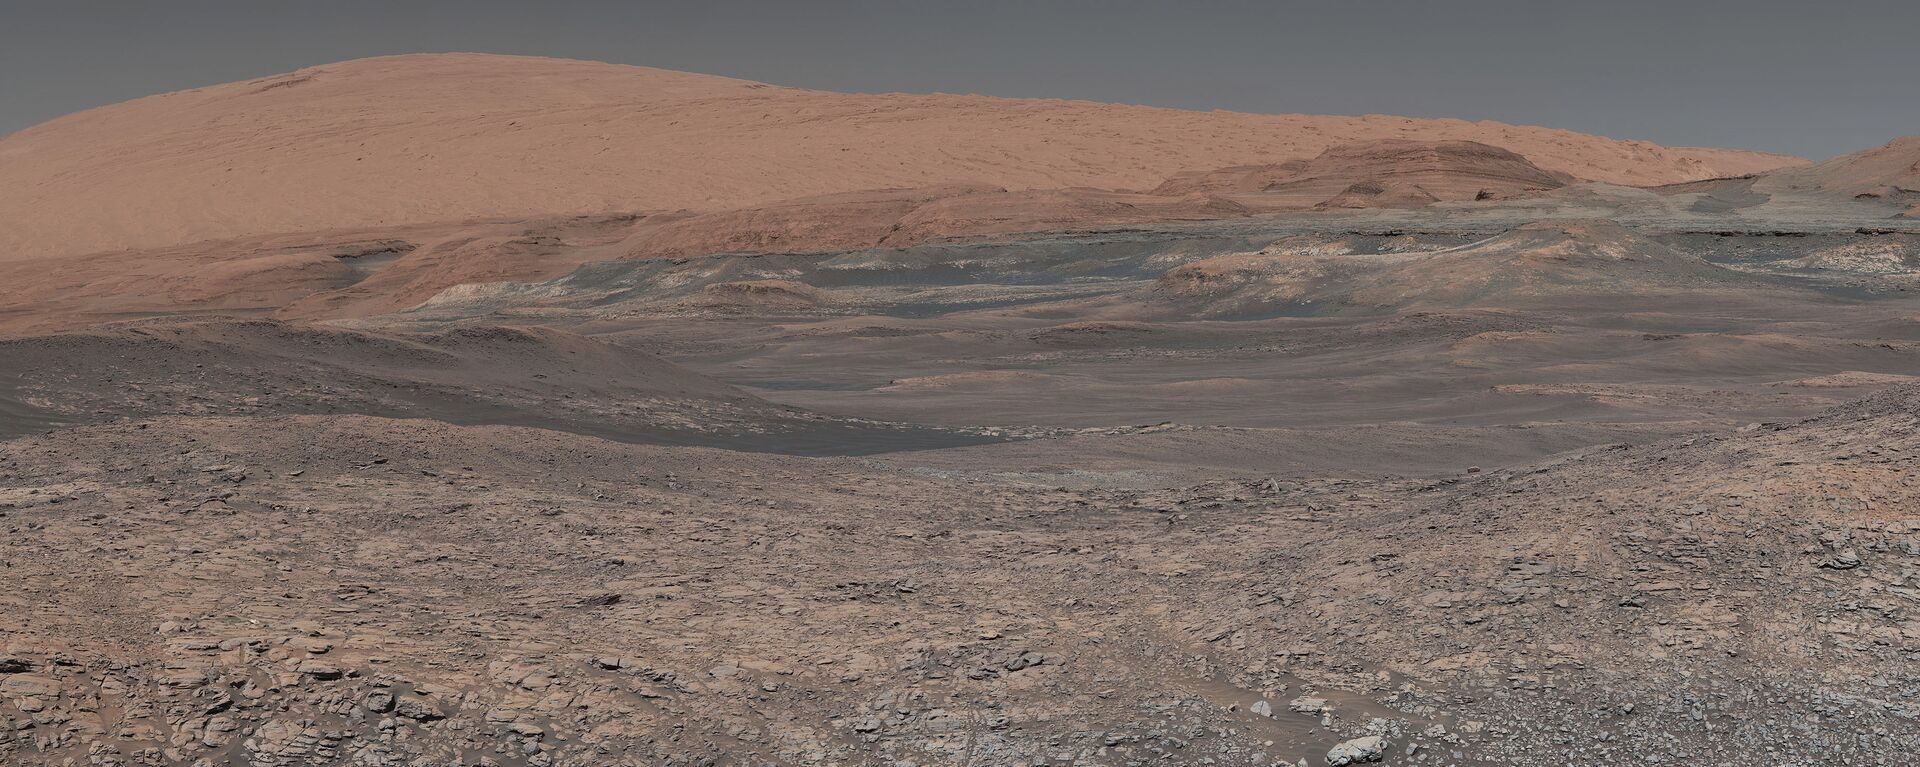 This image provided by NASA, assembled from a series of January 2018 photos made by the Mars Curiosity rover, shows an uphill view of Mount Sharp, which Curiosity has been climbing. - Sputnik International, 1920, 02.12.2022